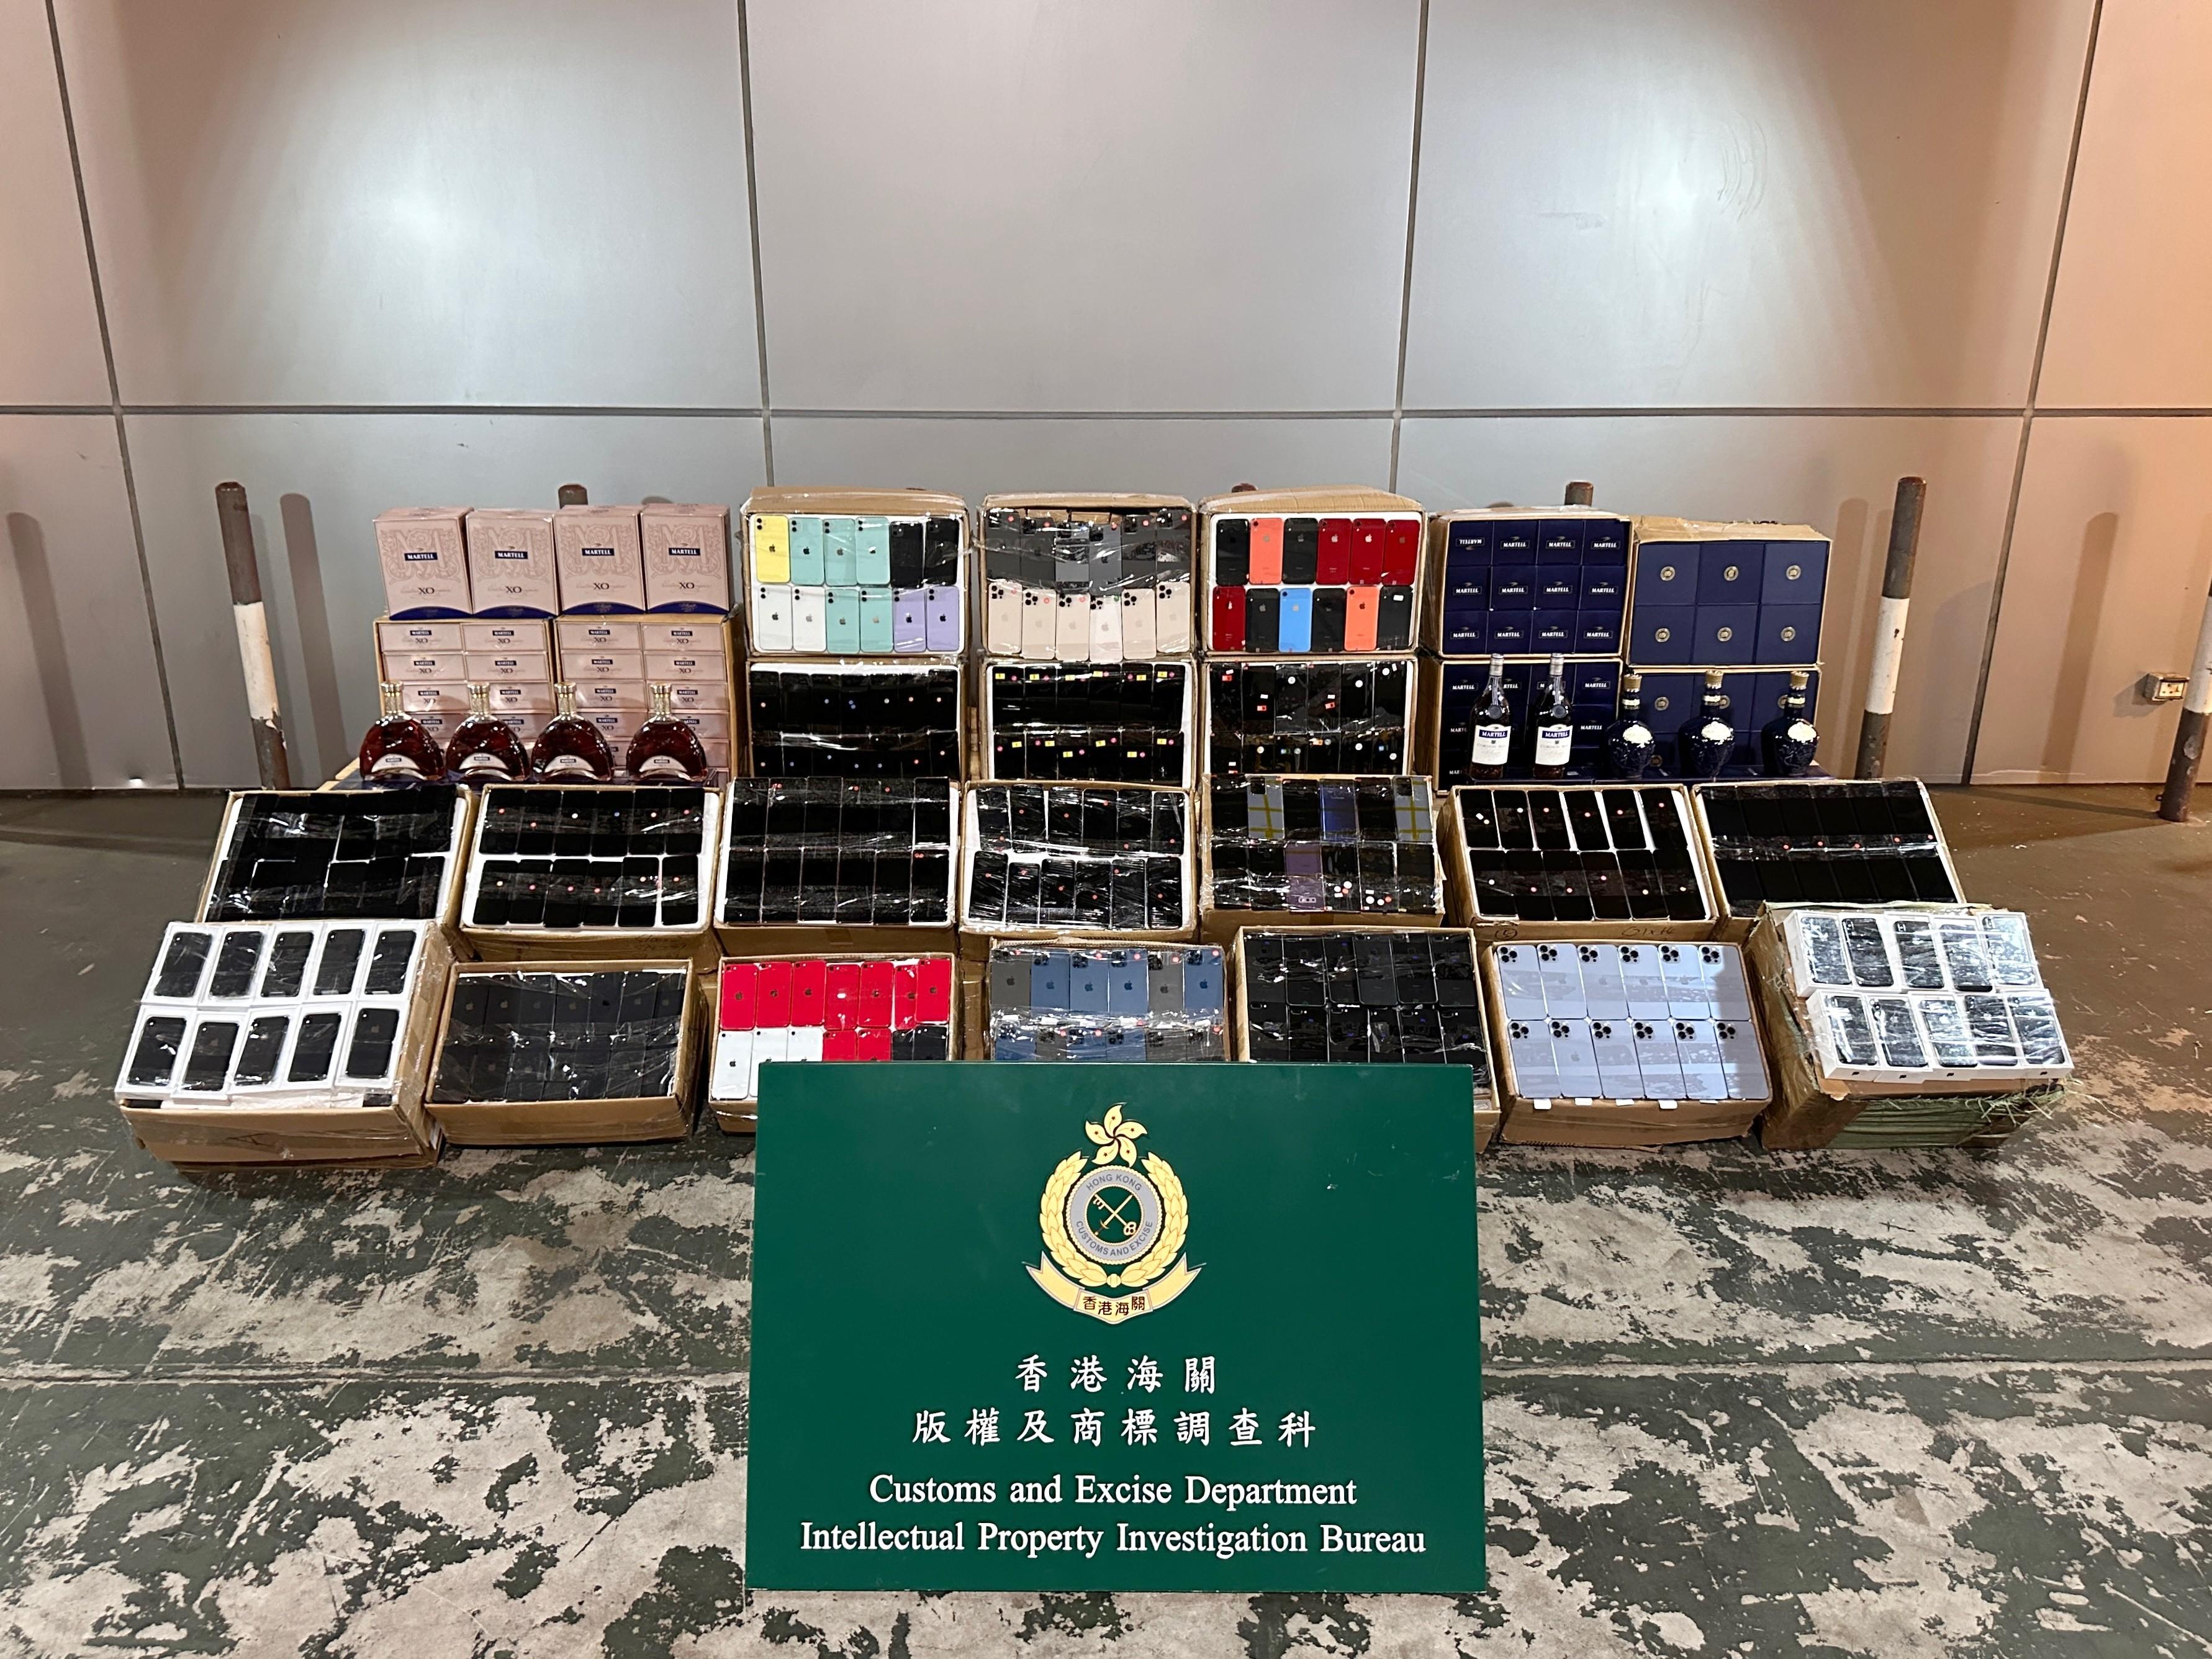 Hong Kong Customs on October 4 seized about 8 400 suspected counterfeit goods and about 260 litres of suspected duty-not-paid liquor at the Tuen Mun River Trade Terminal Customs Cargo Examination Compound. The total estimated market value was about $11 million, with a duty potential of about $ 260,000. Photo shows the suspected counterfeit goods and the suspected duty-not-paid liquor seized.